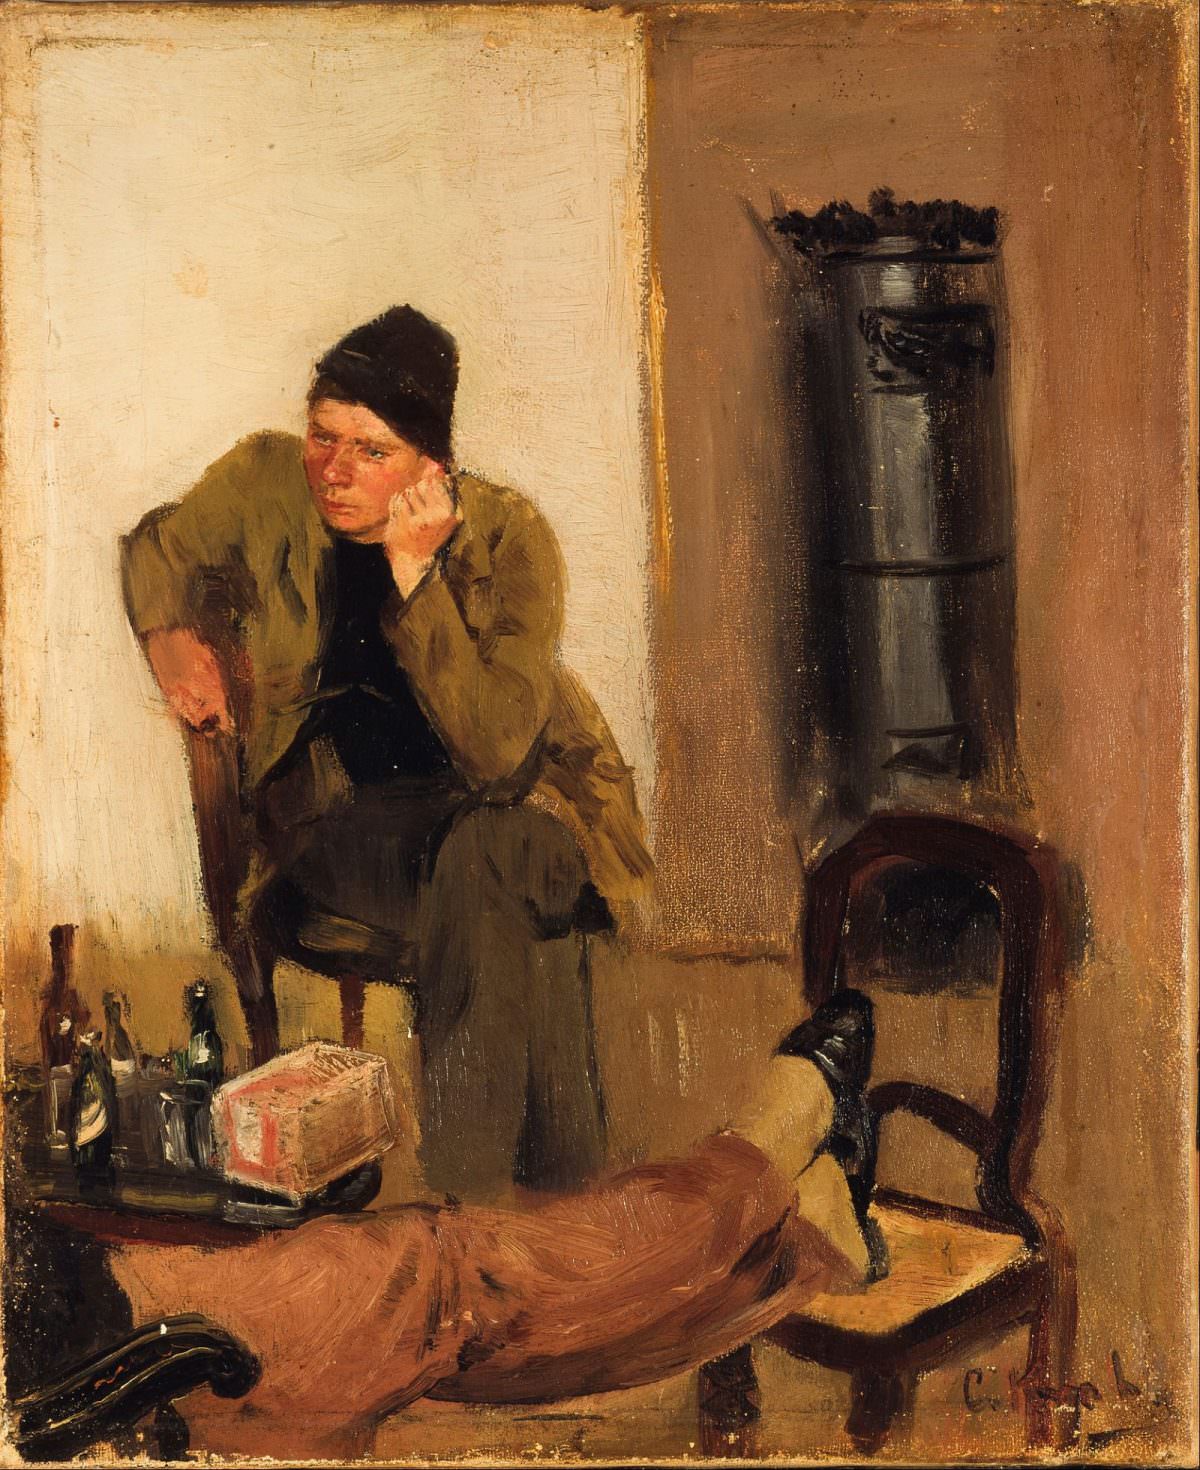 Charles Lundh in Conversation with Christian Krohg, 1883.